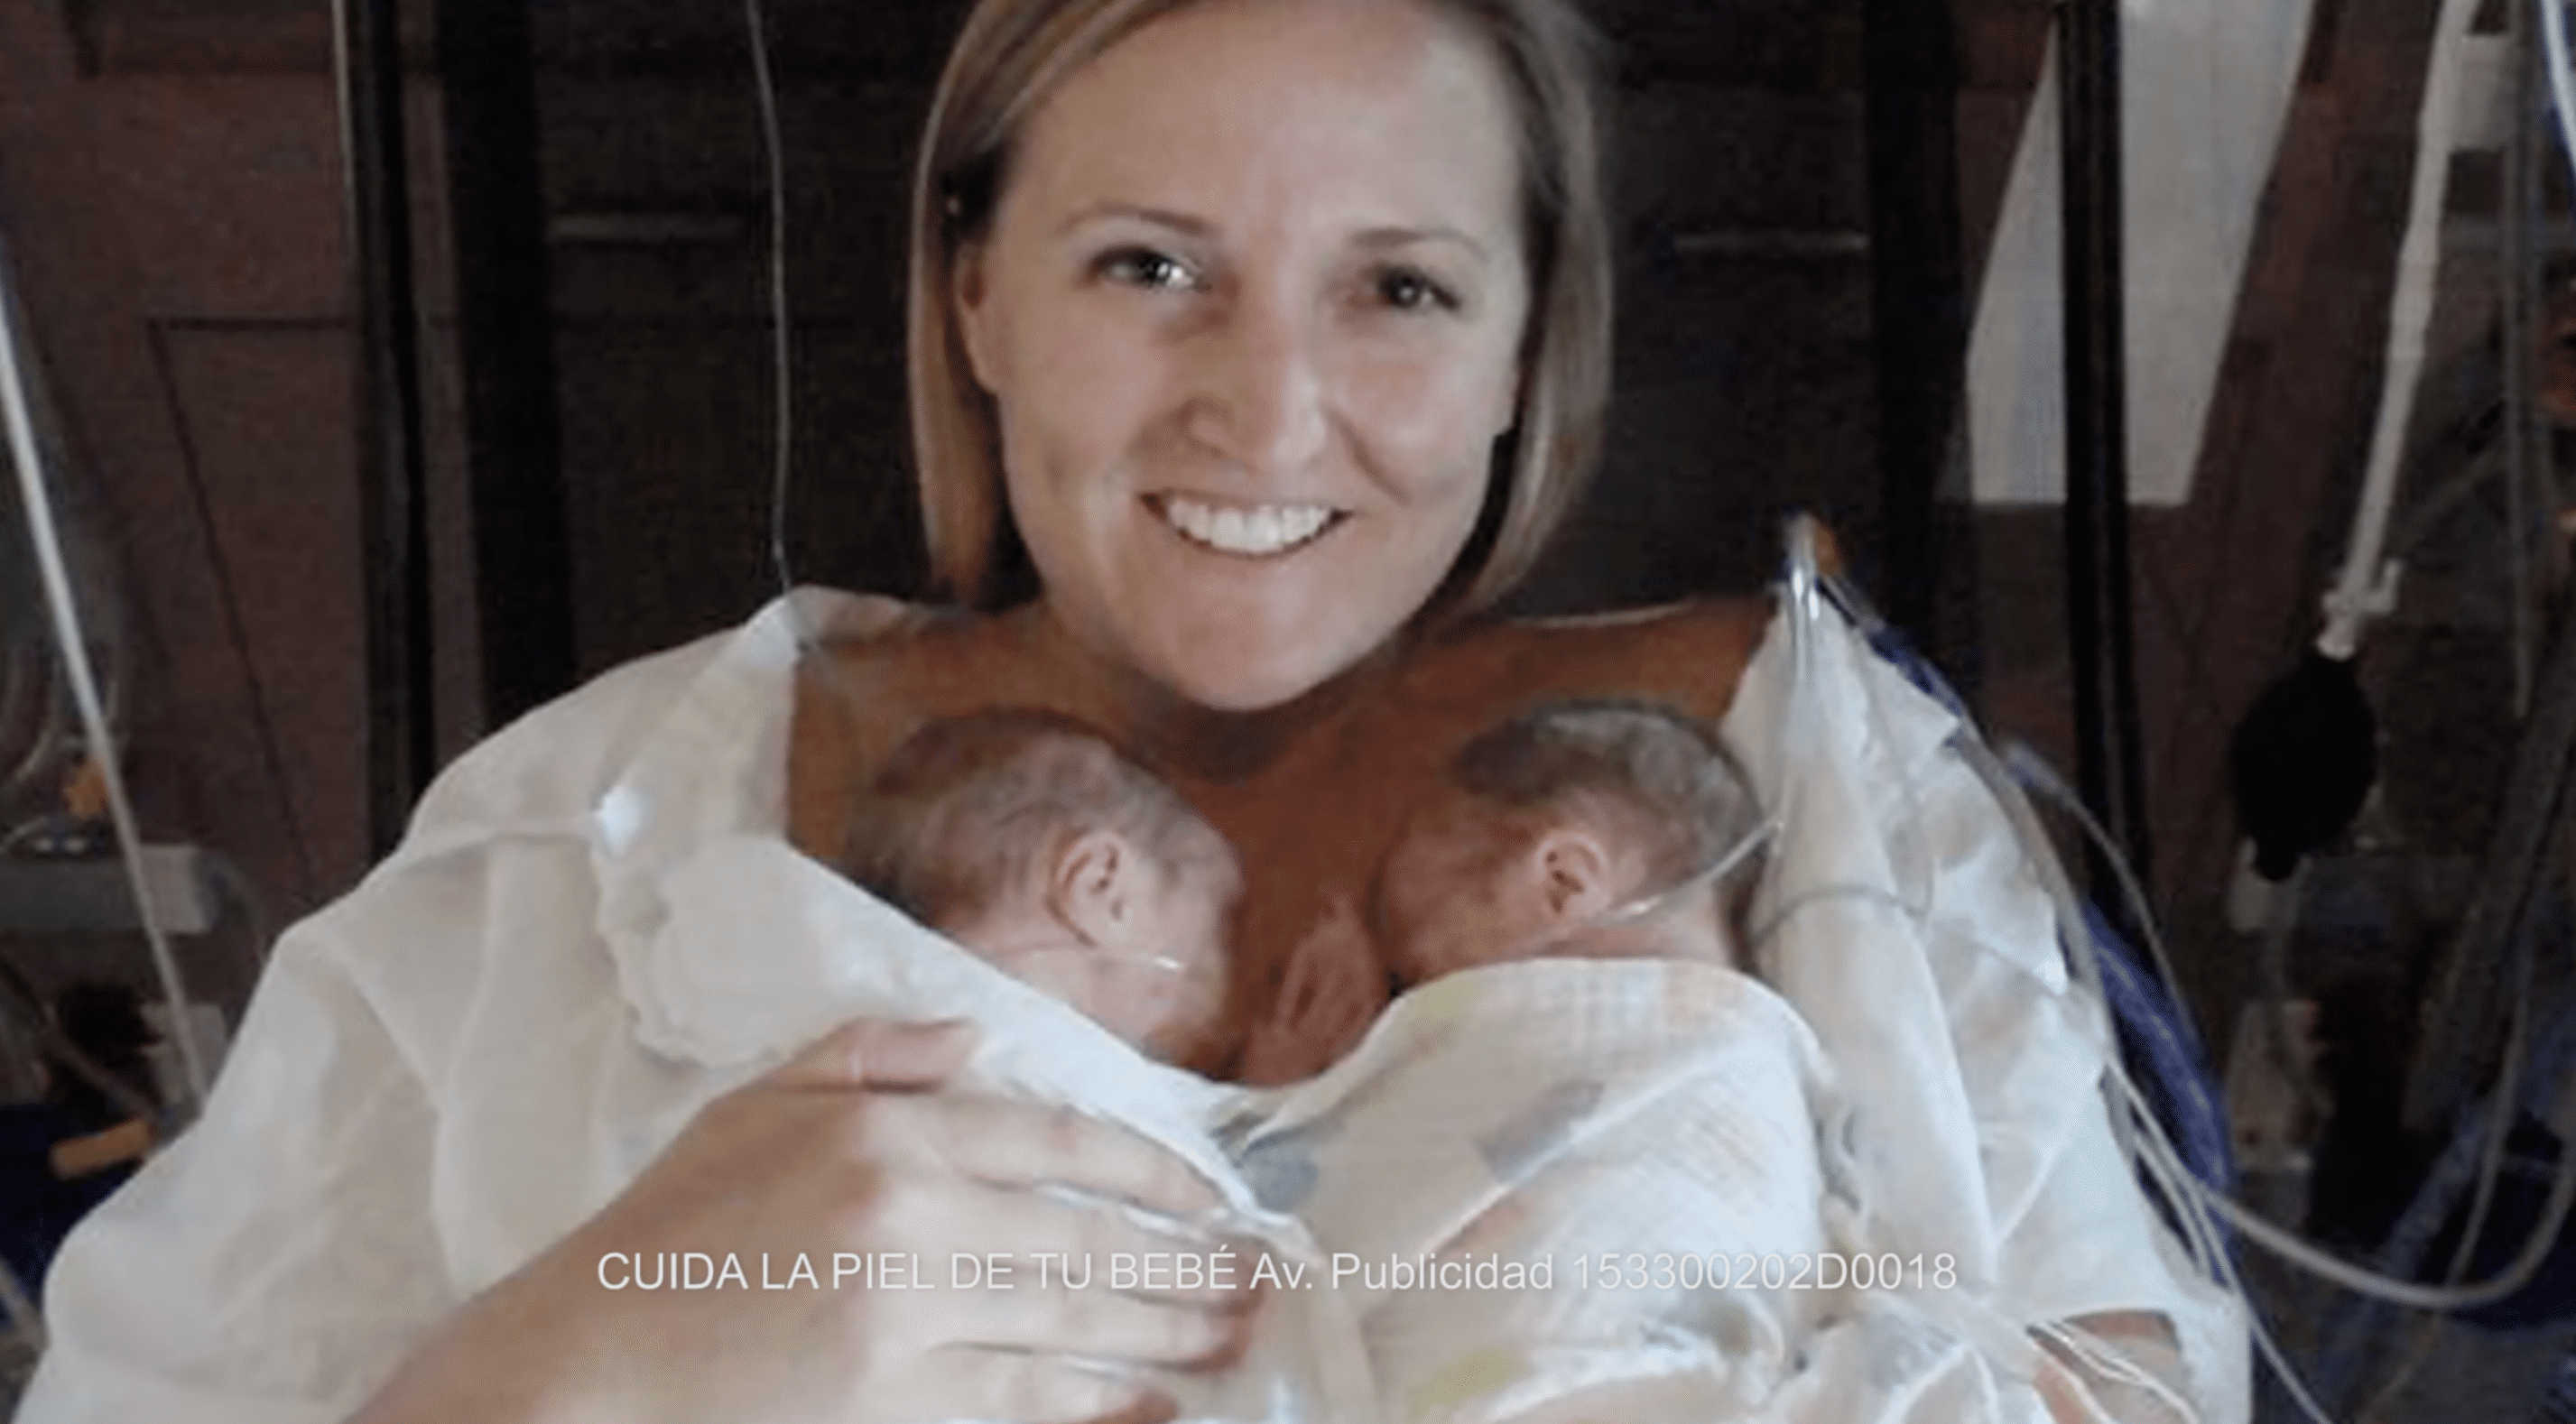 Kate Ogg pictured with her twins, Jamie and Emily, resting across her bare chest. | Photo: Photo: YouTube.com/J&J - Mexico y Centroamerica